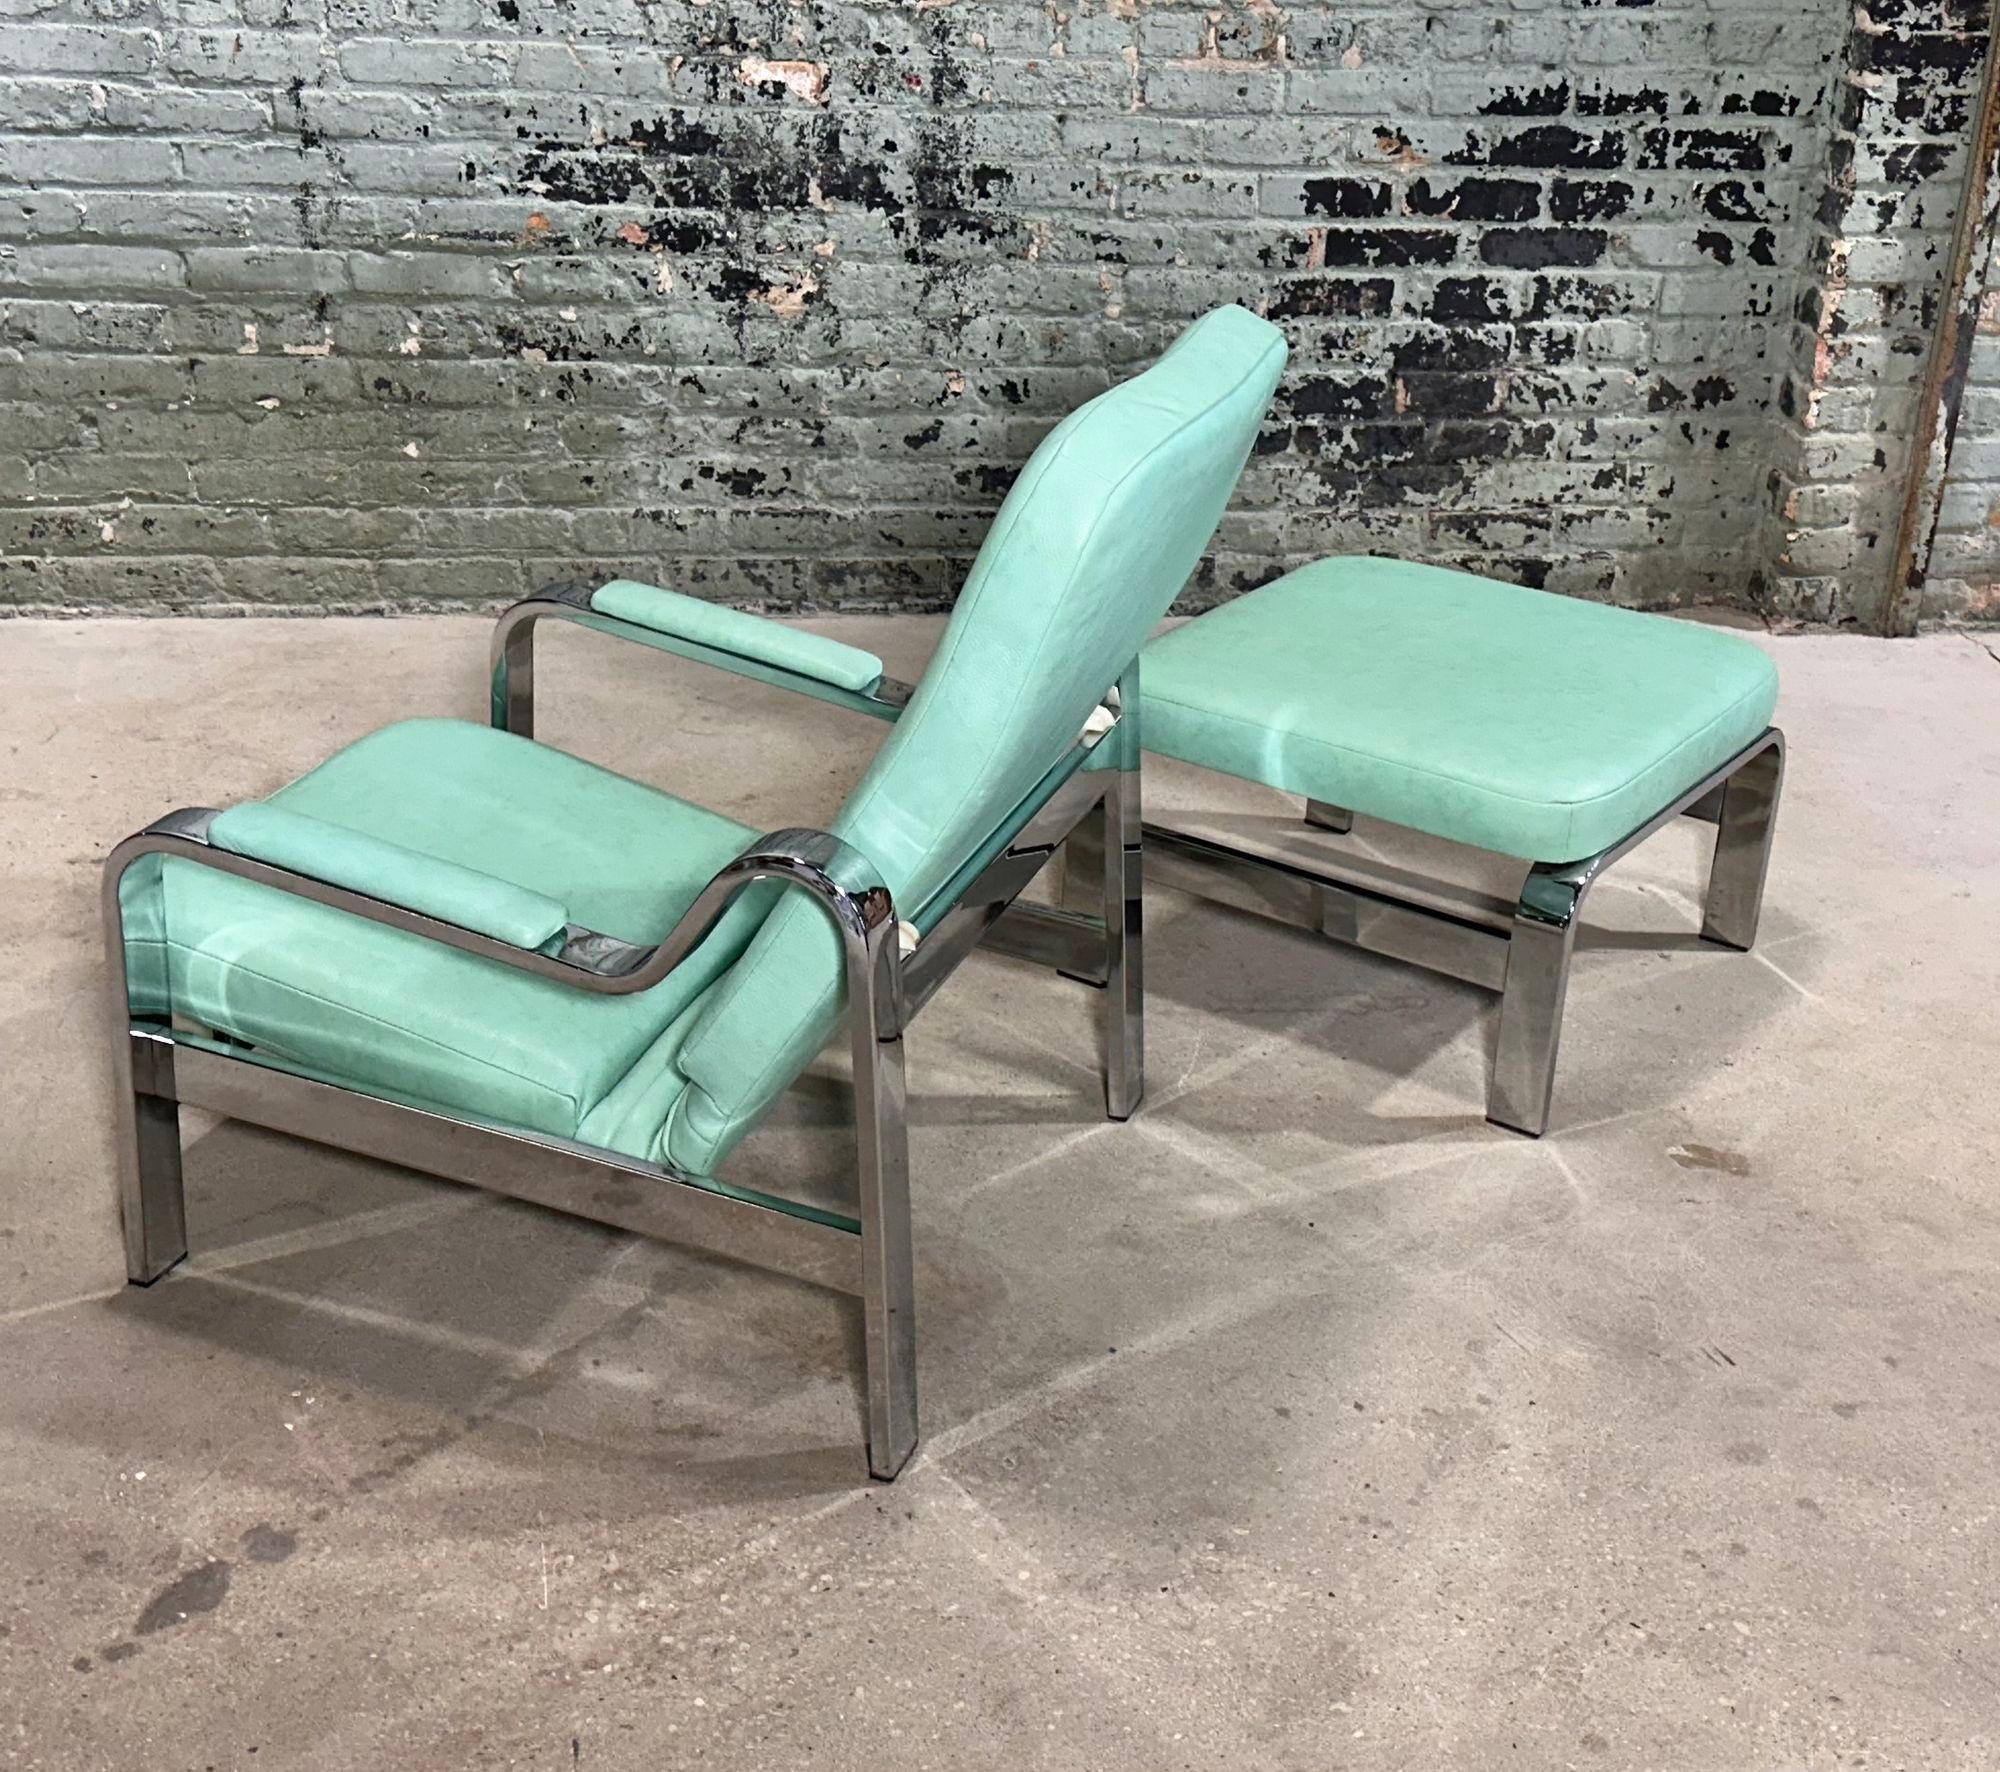 1970's Teal Leather and Chrome Lounge Chair and Ottoman. Chair reclines and has been newly reupholstered
Measures 34